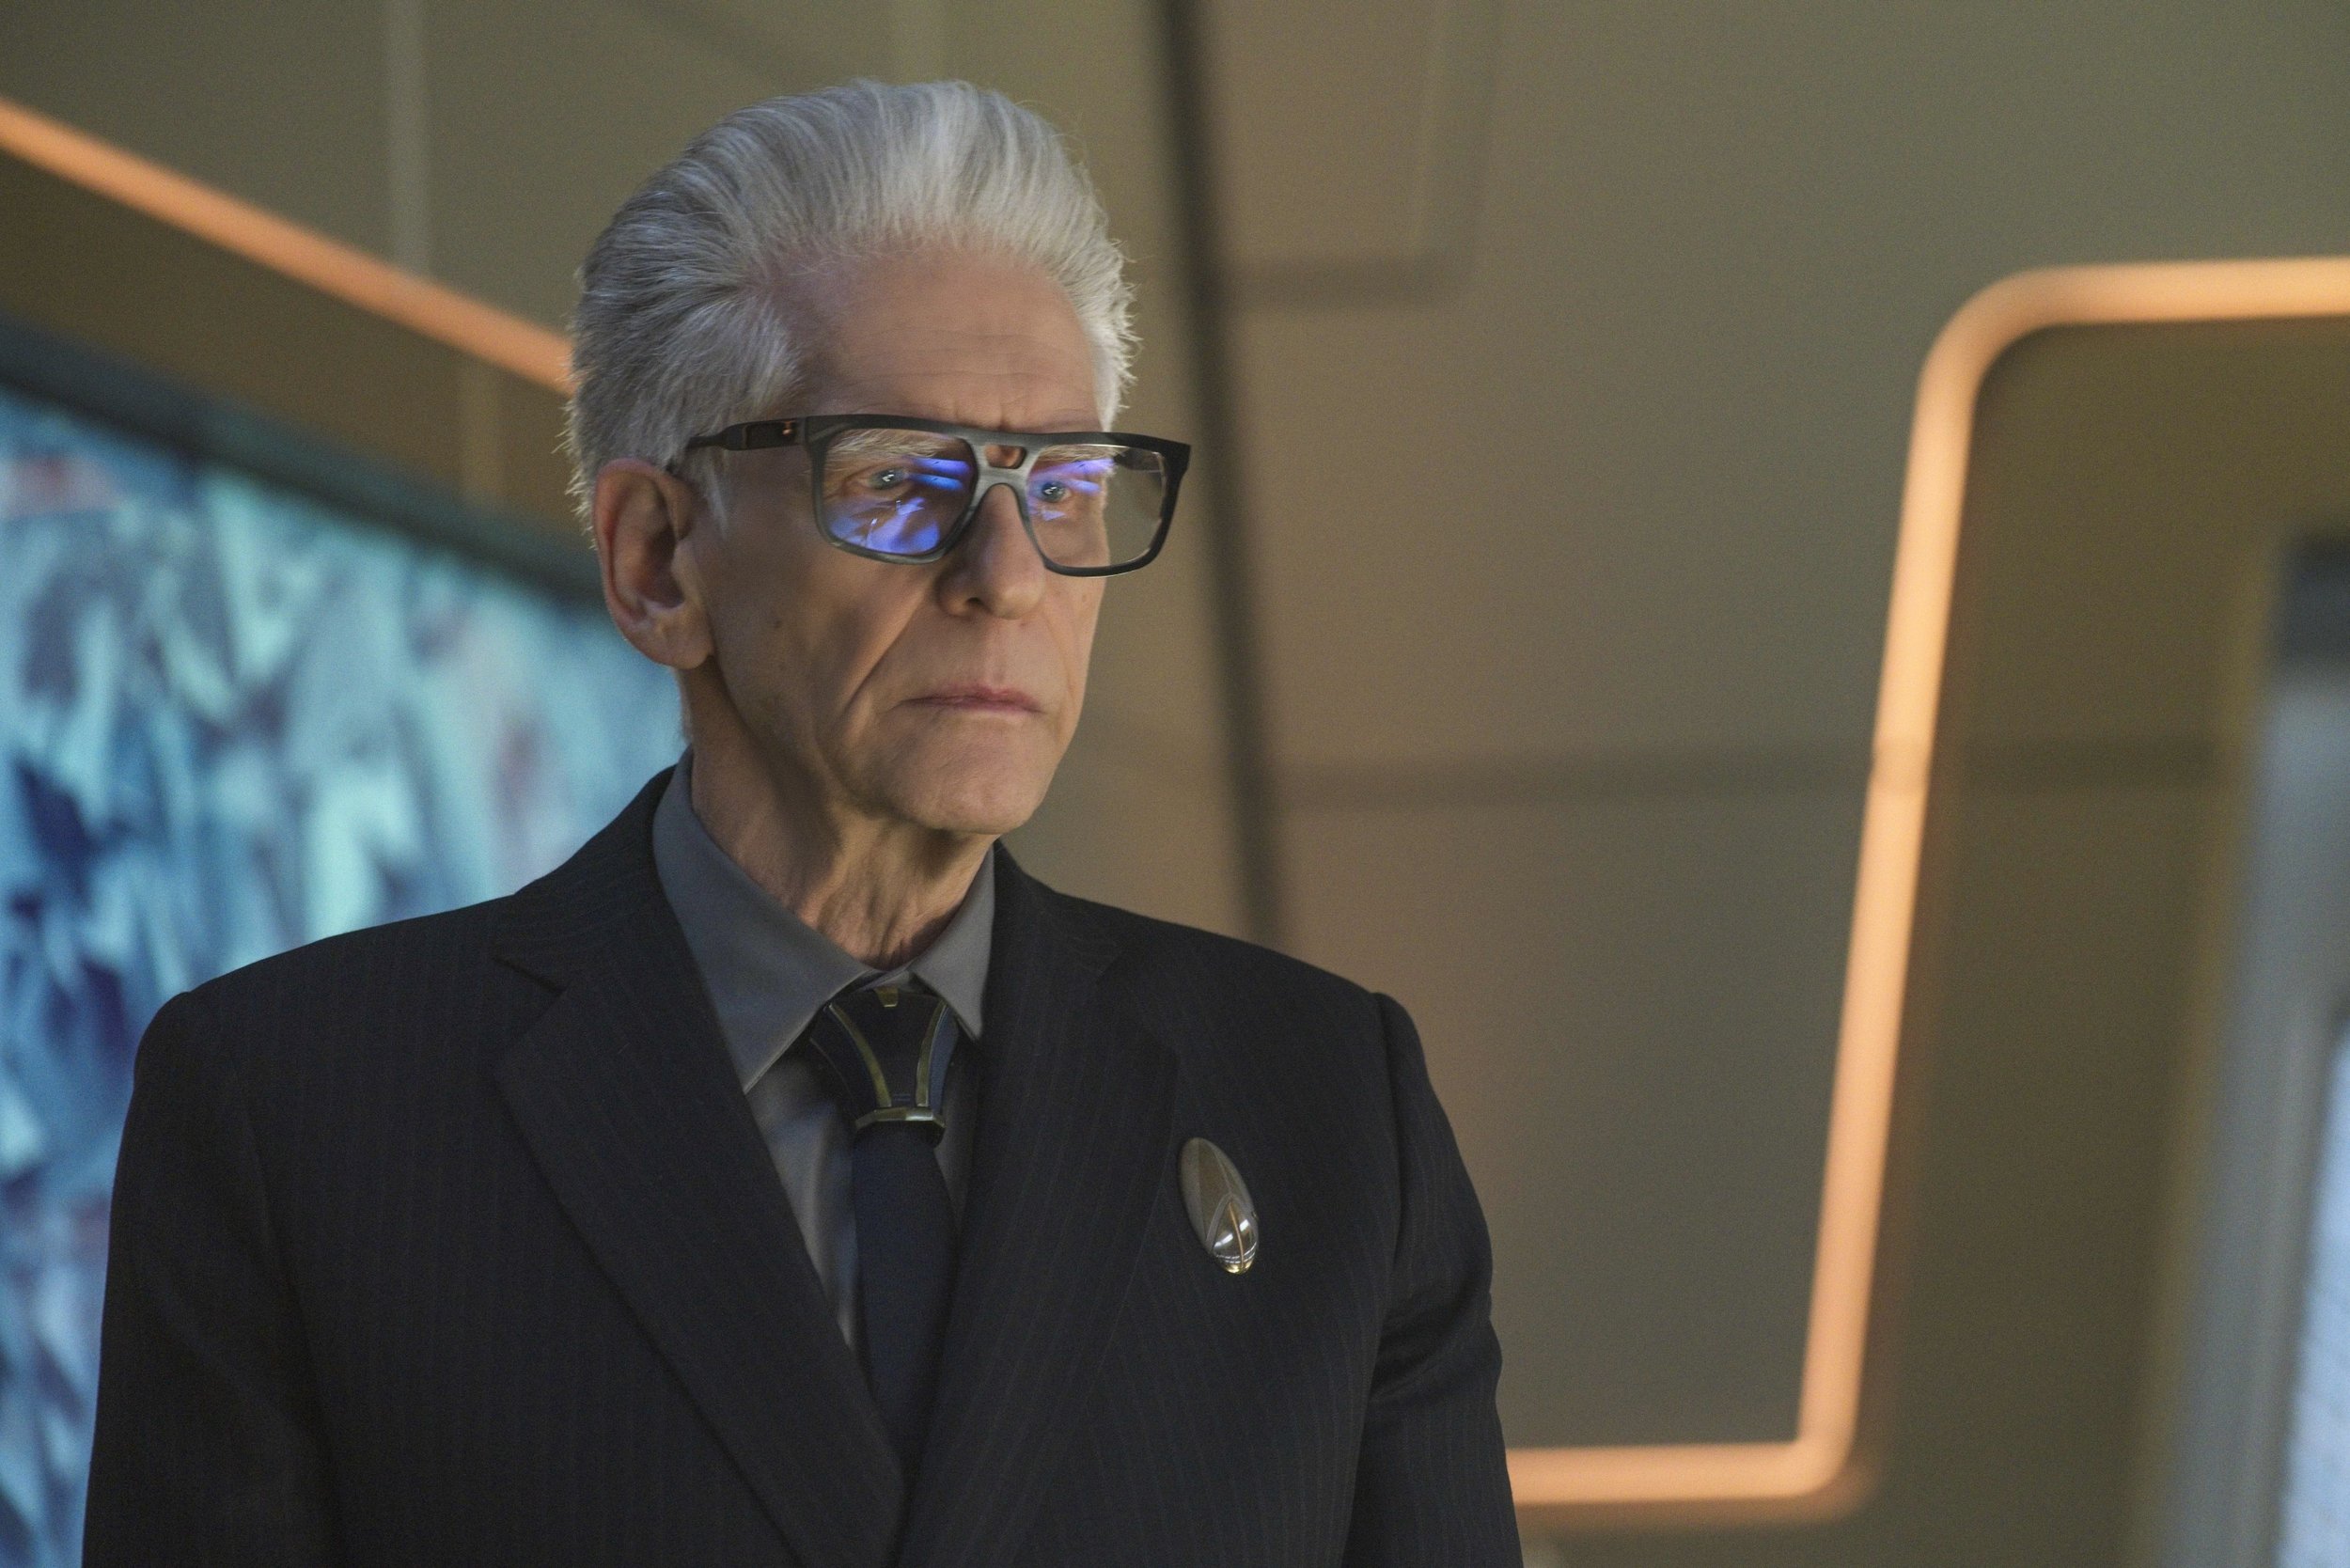   Pictured: David Cronenberg as Kovich of the Paramount+ original series STAR TREK: DISCOVERY. Photo Cr: Michael Gibson/Paramount+ (C) 2021 CBS Interactive. All Rights Reserved.  